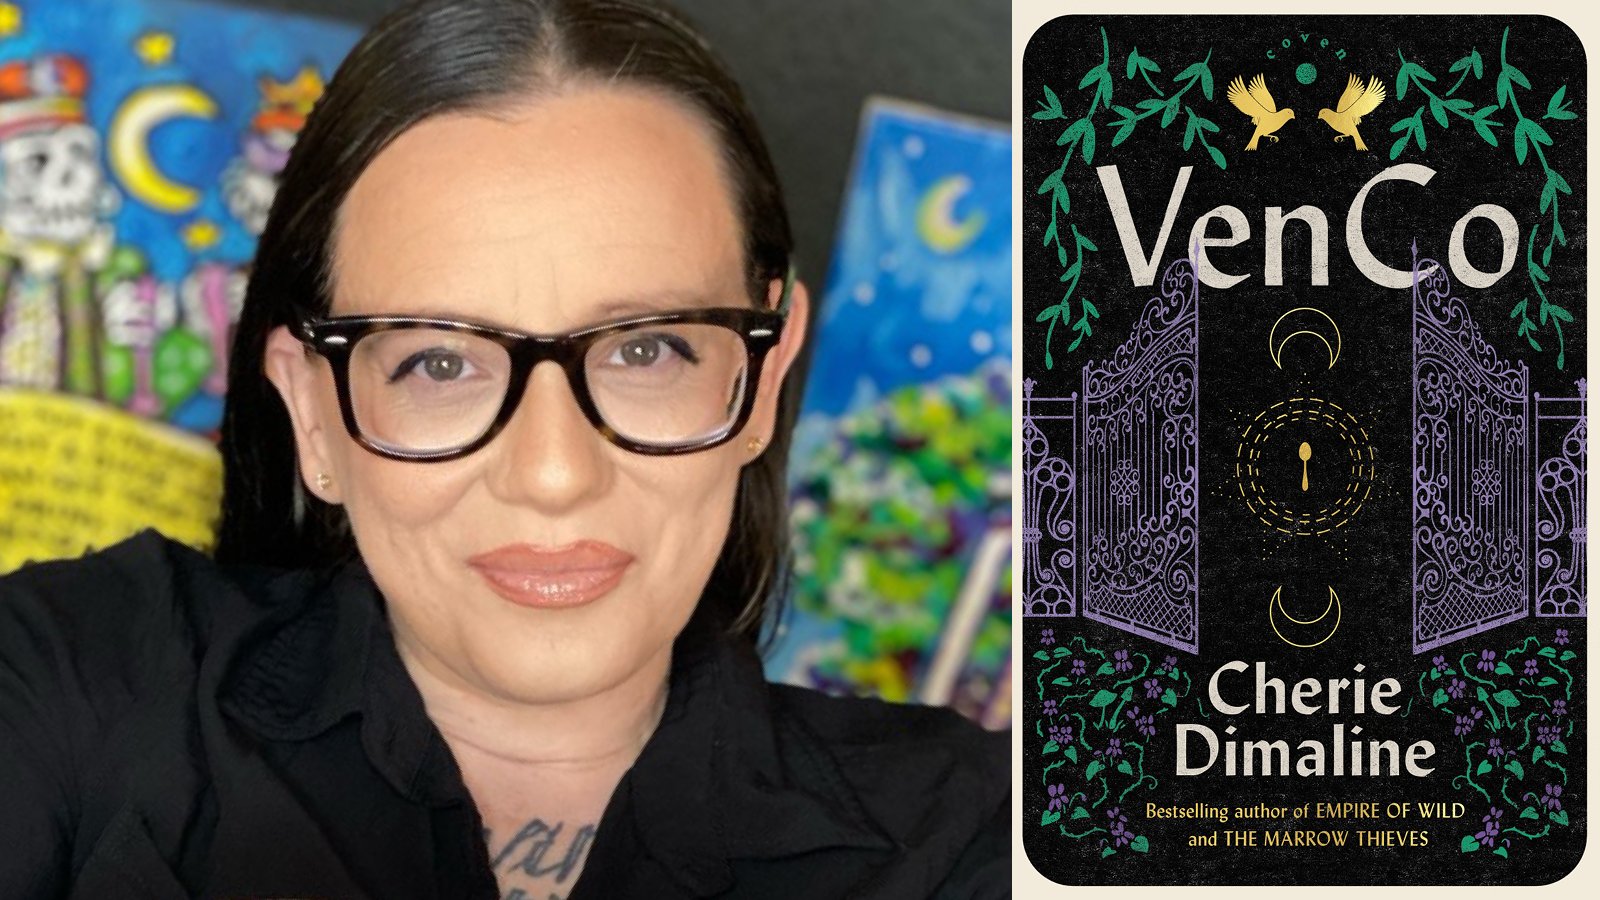 Image of Cherie Dimaline and the book cover for VenCo.